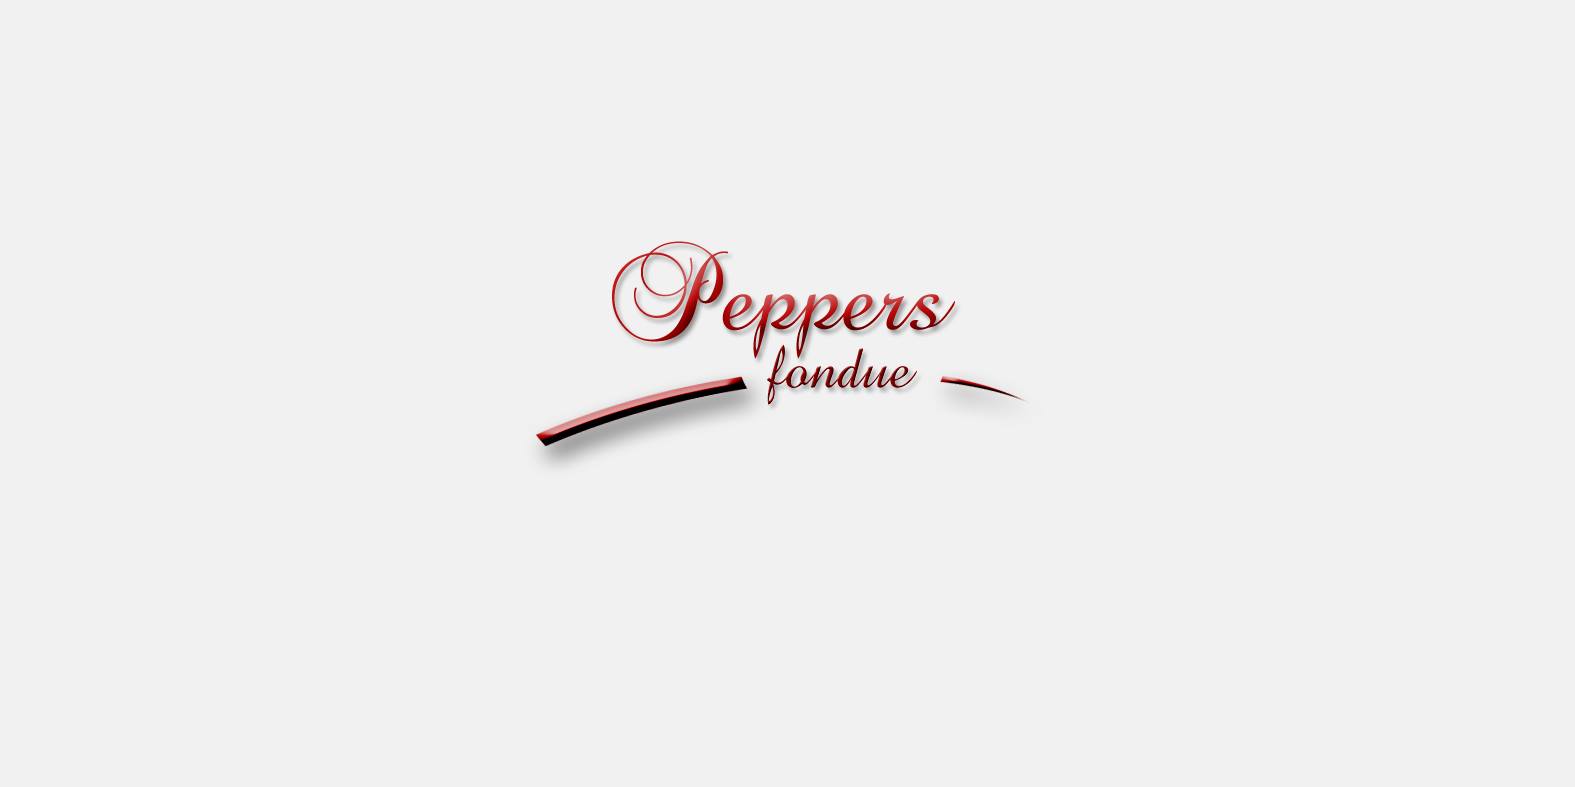 Peppers Foundue